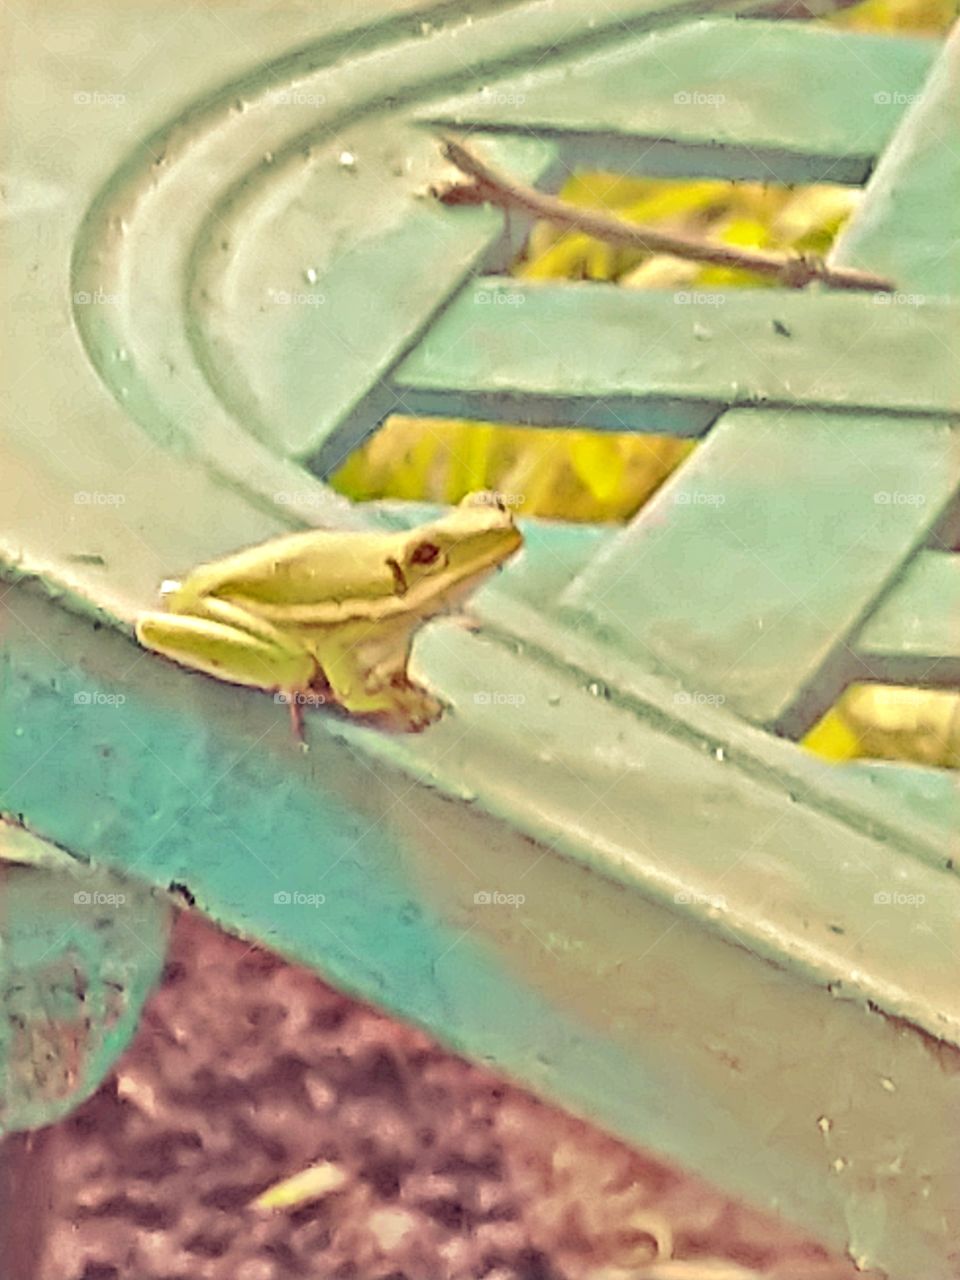 frog sitting on a chair